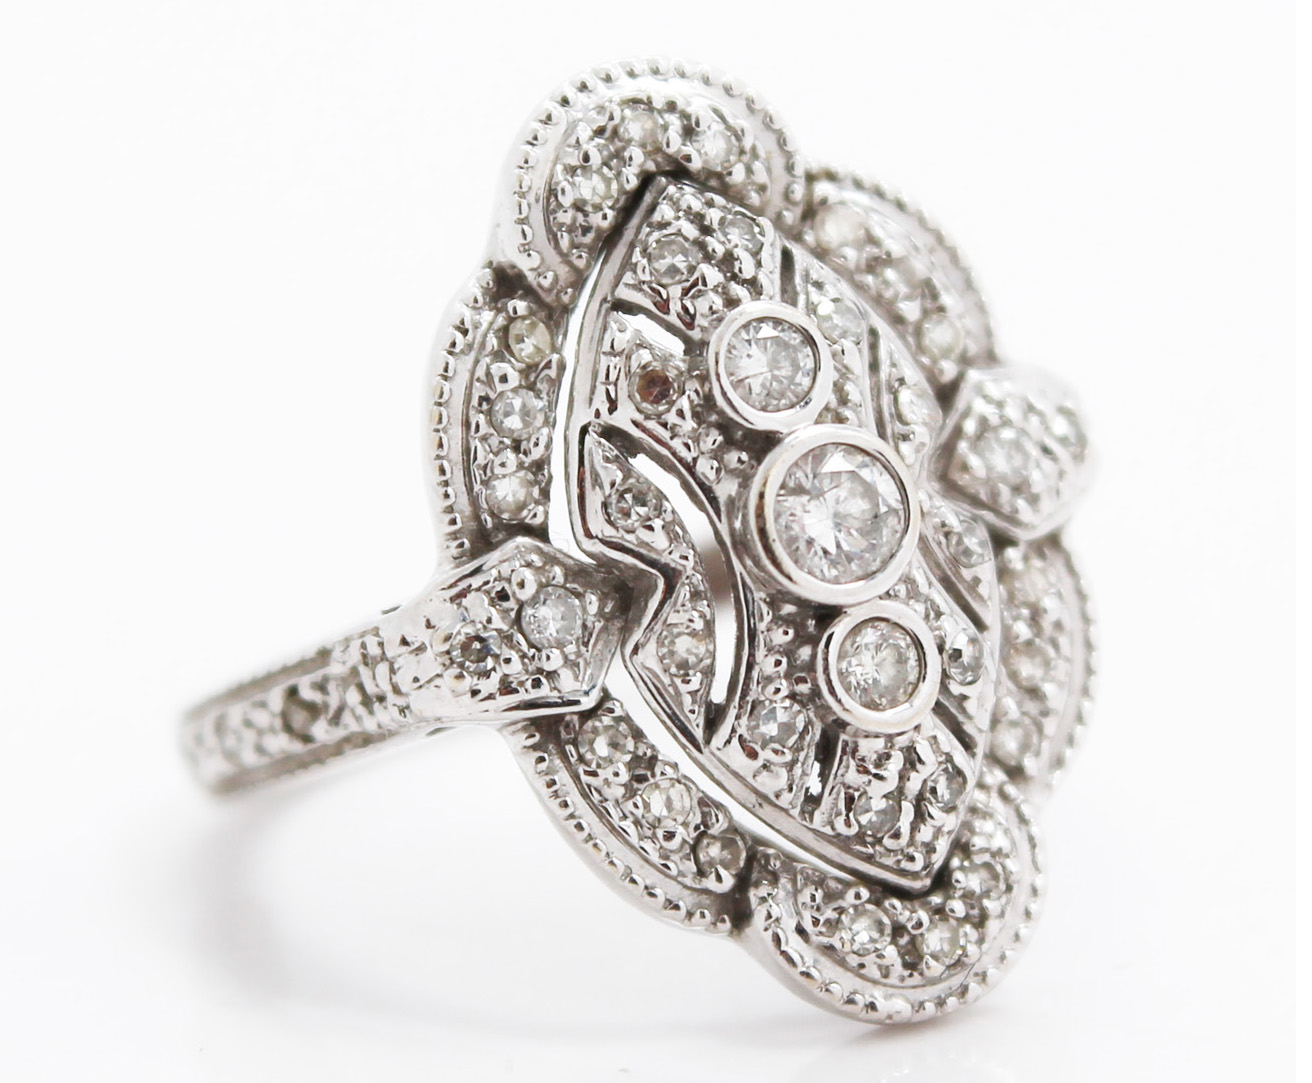 Antique Art Deco Diamond and White Gold Ring